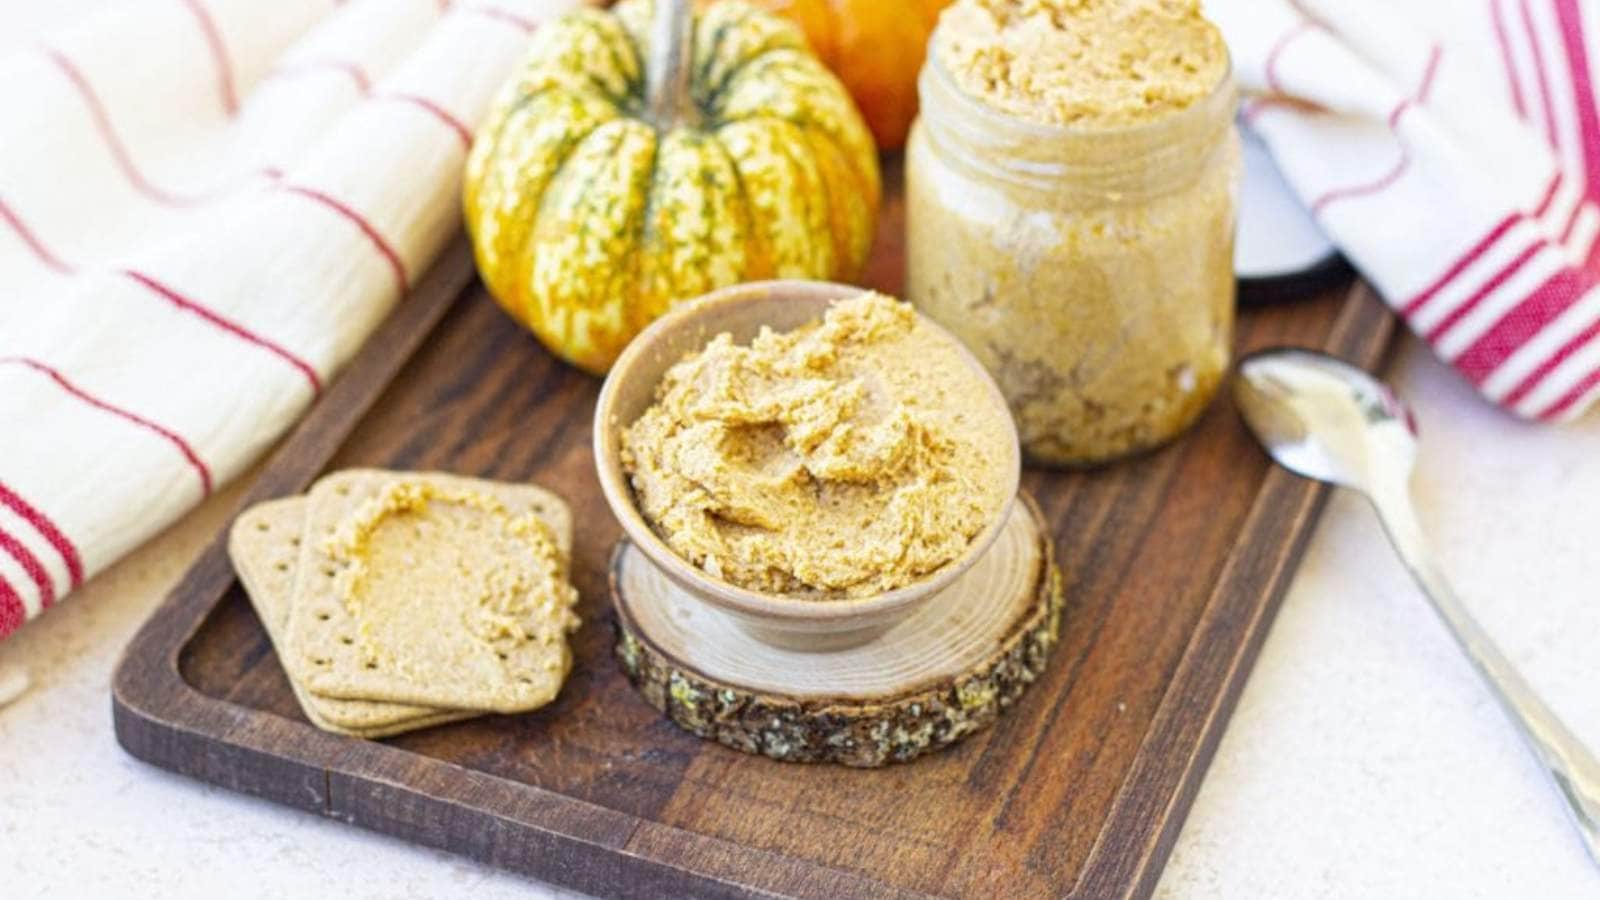 Whipped Pumpkin Spice Butter Spread recipe by Food Plus Words.